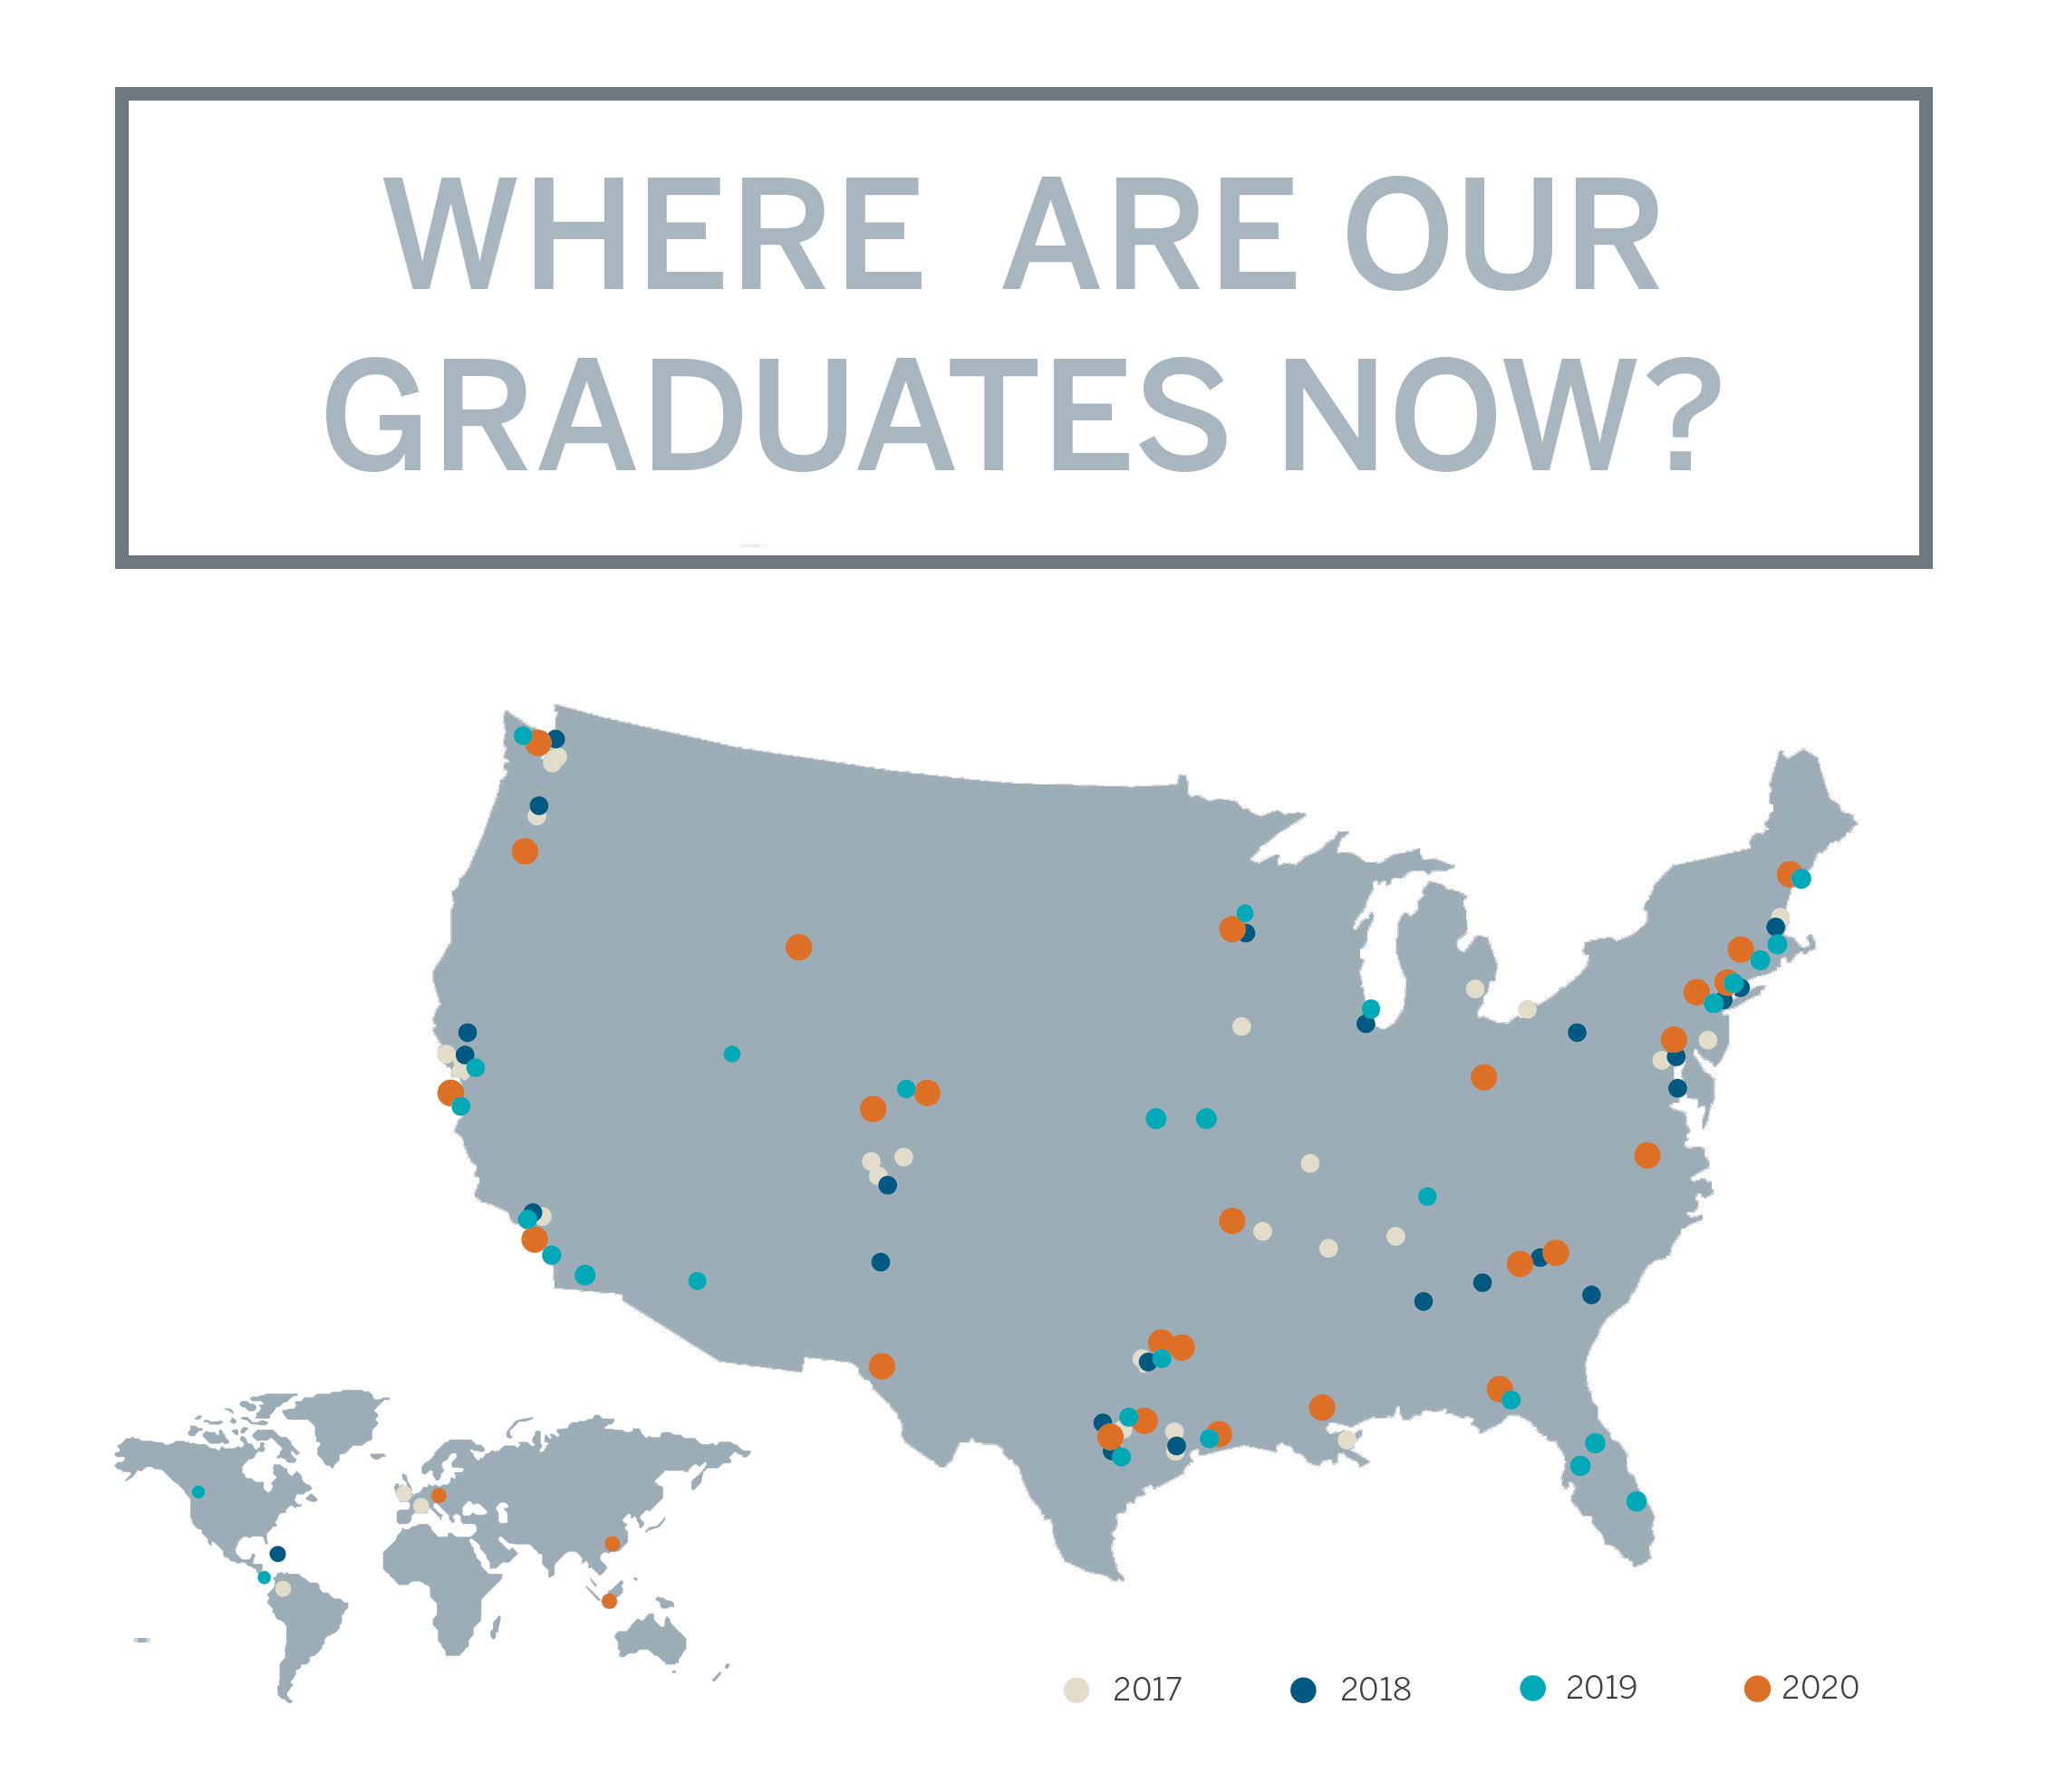 Map of the United States highlighting where School of Architecture graduates are located